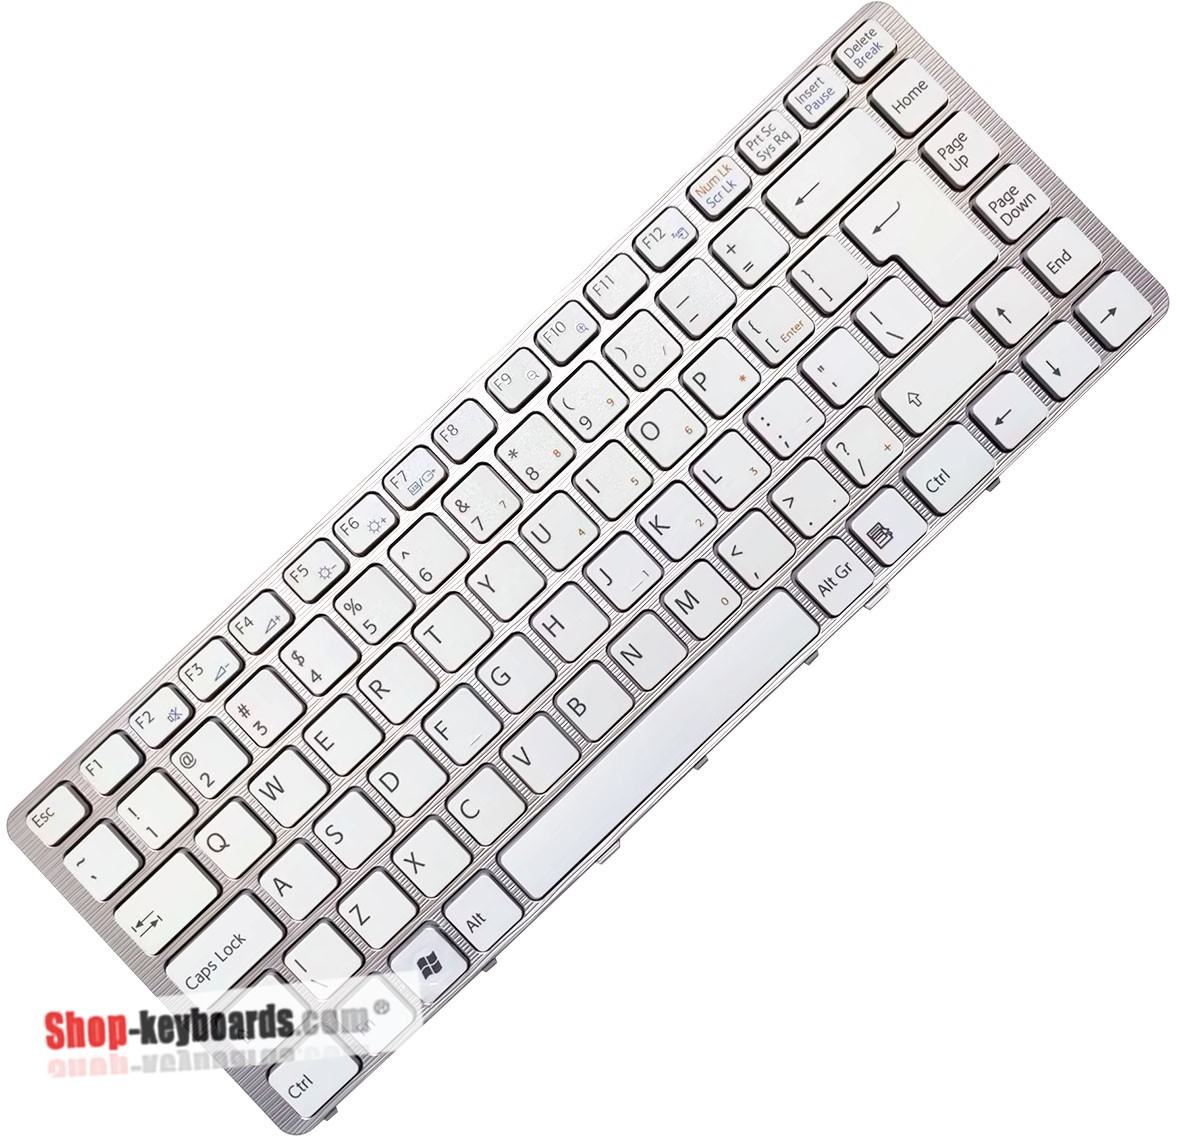 Sony VAIO VGN-NW310F/T  Keyboard replacement